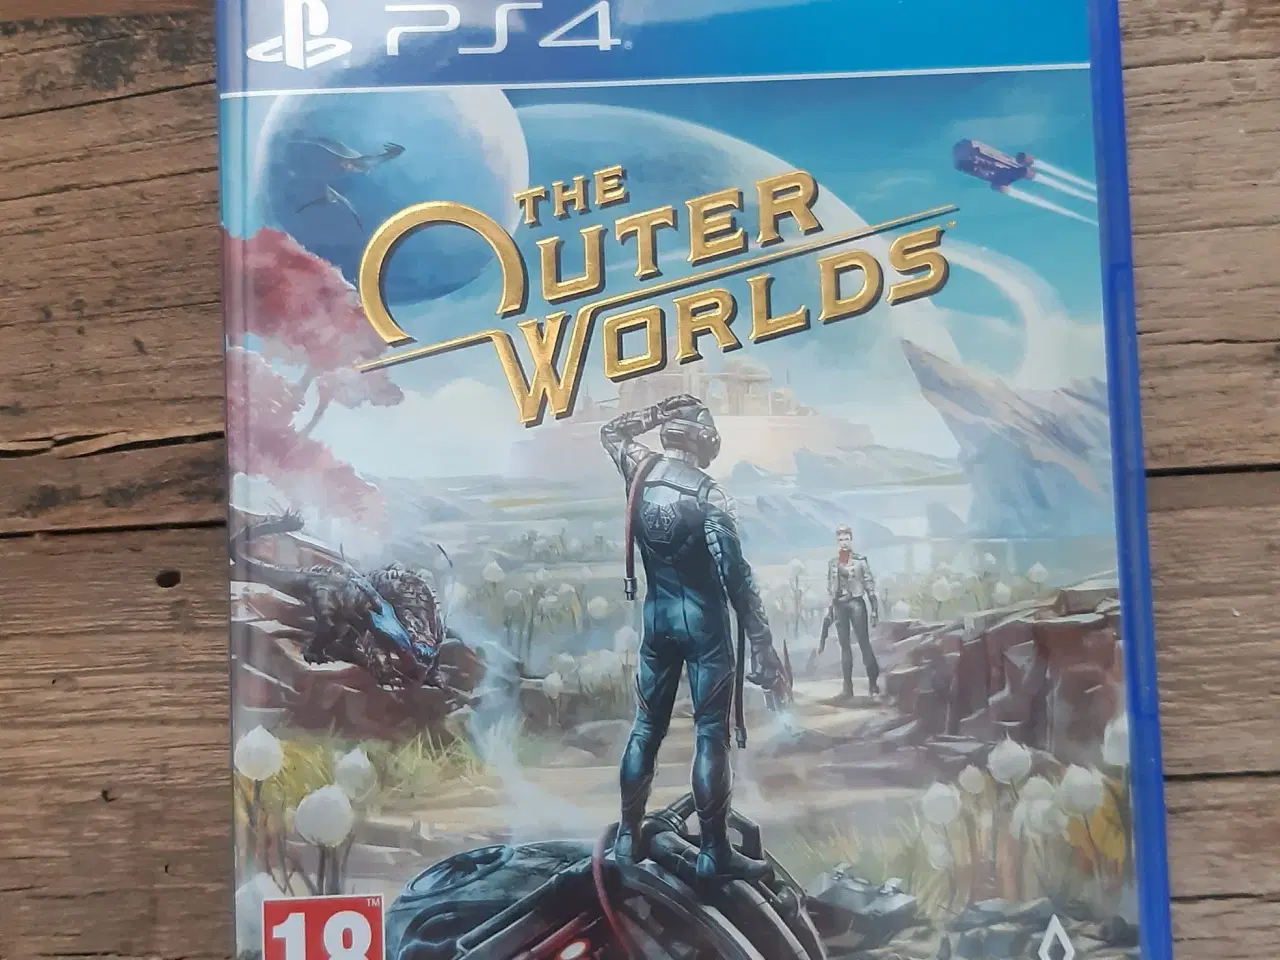 Billede 1 - The outer worlds PS4